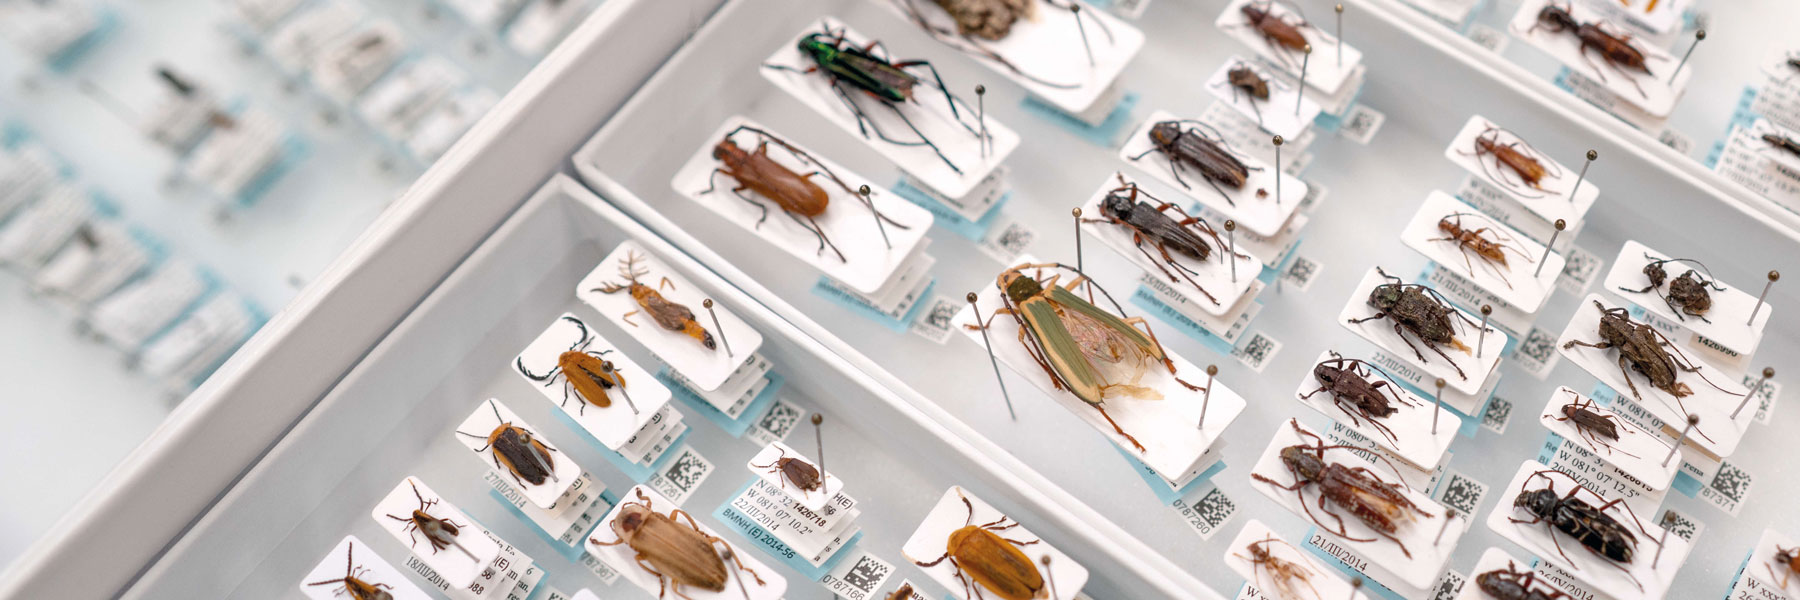 National History Museum of London, Insect samples